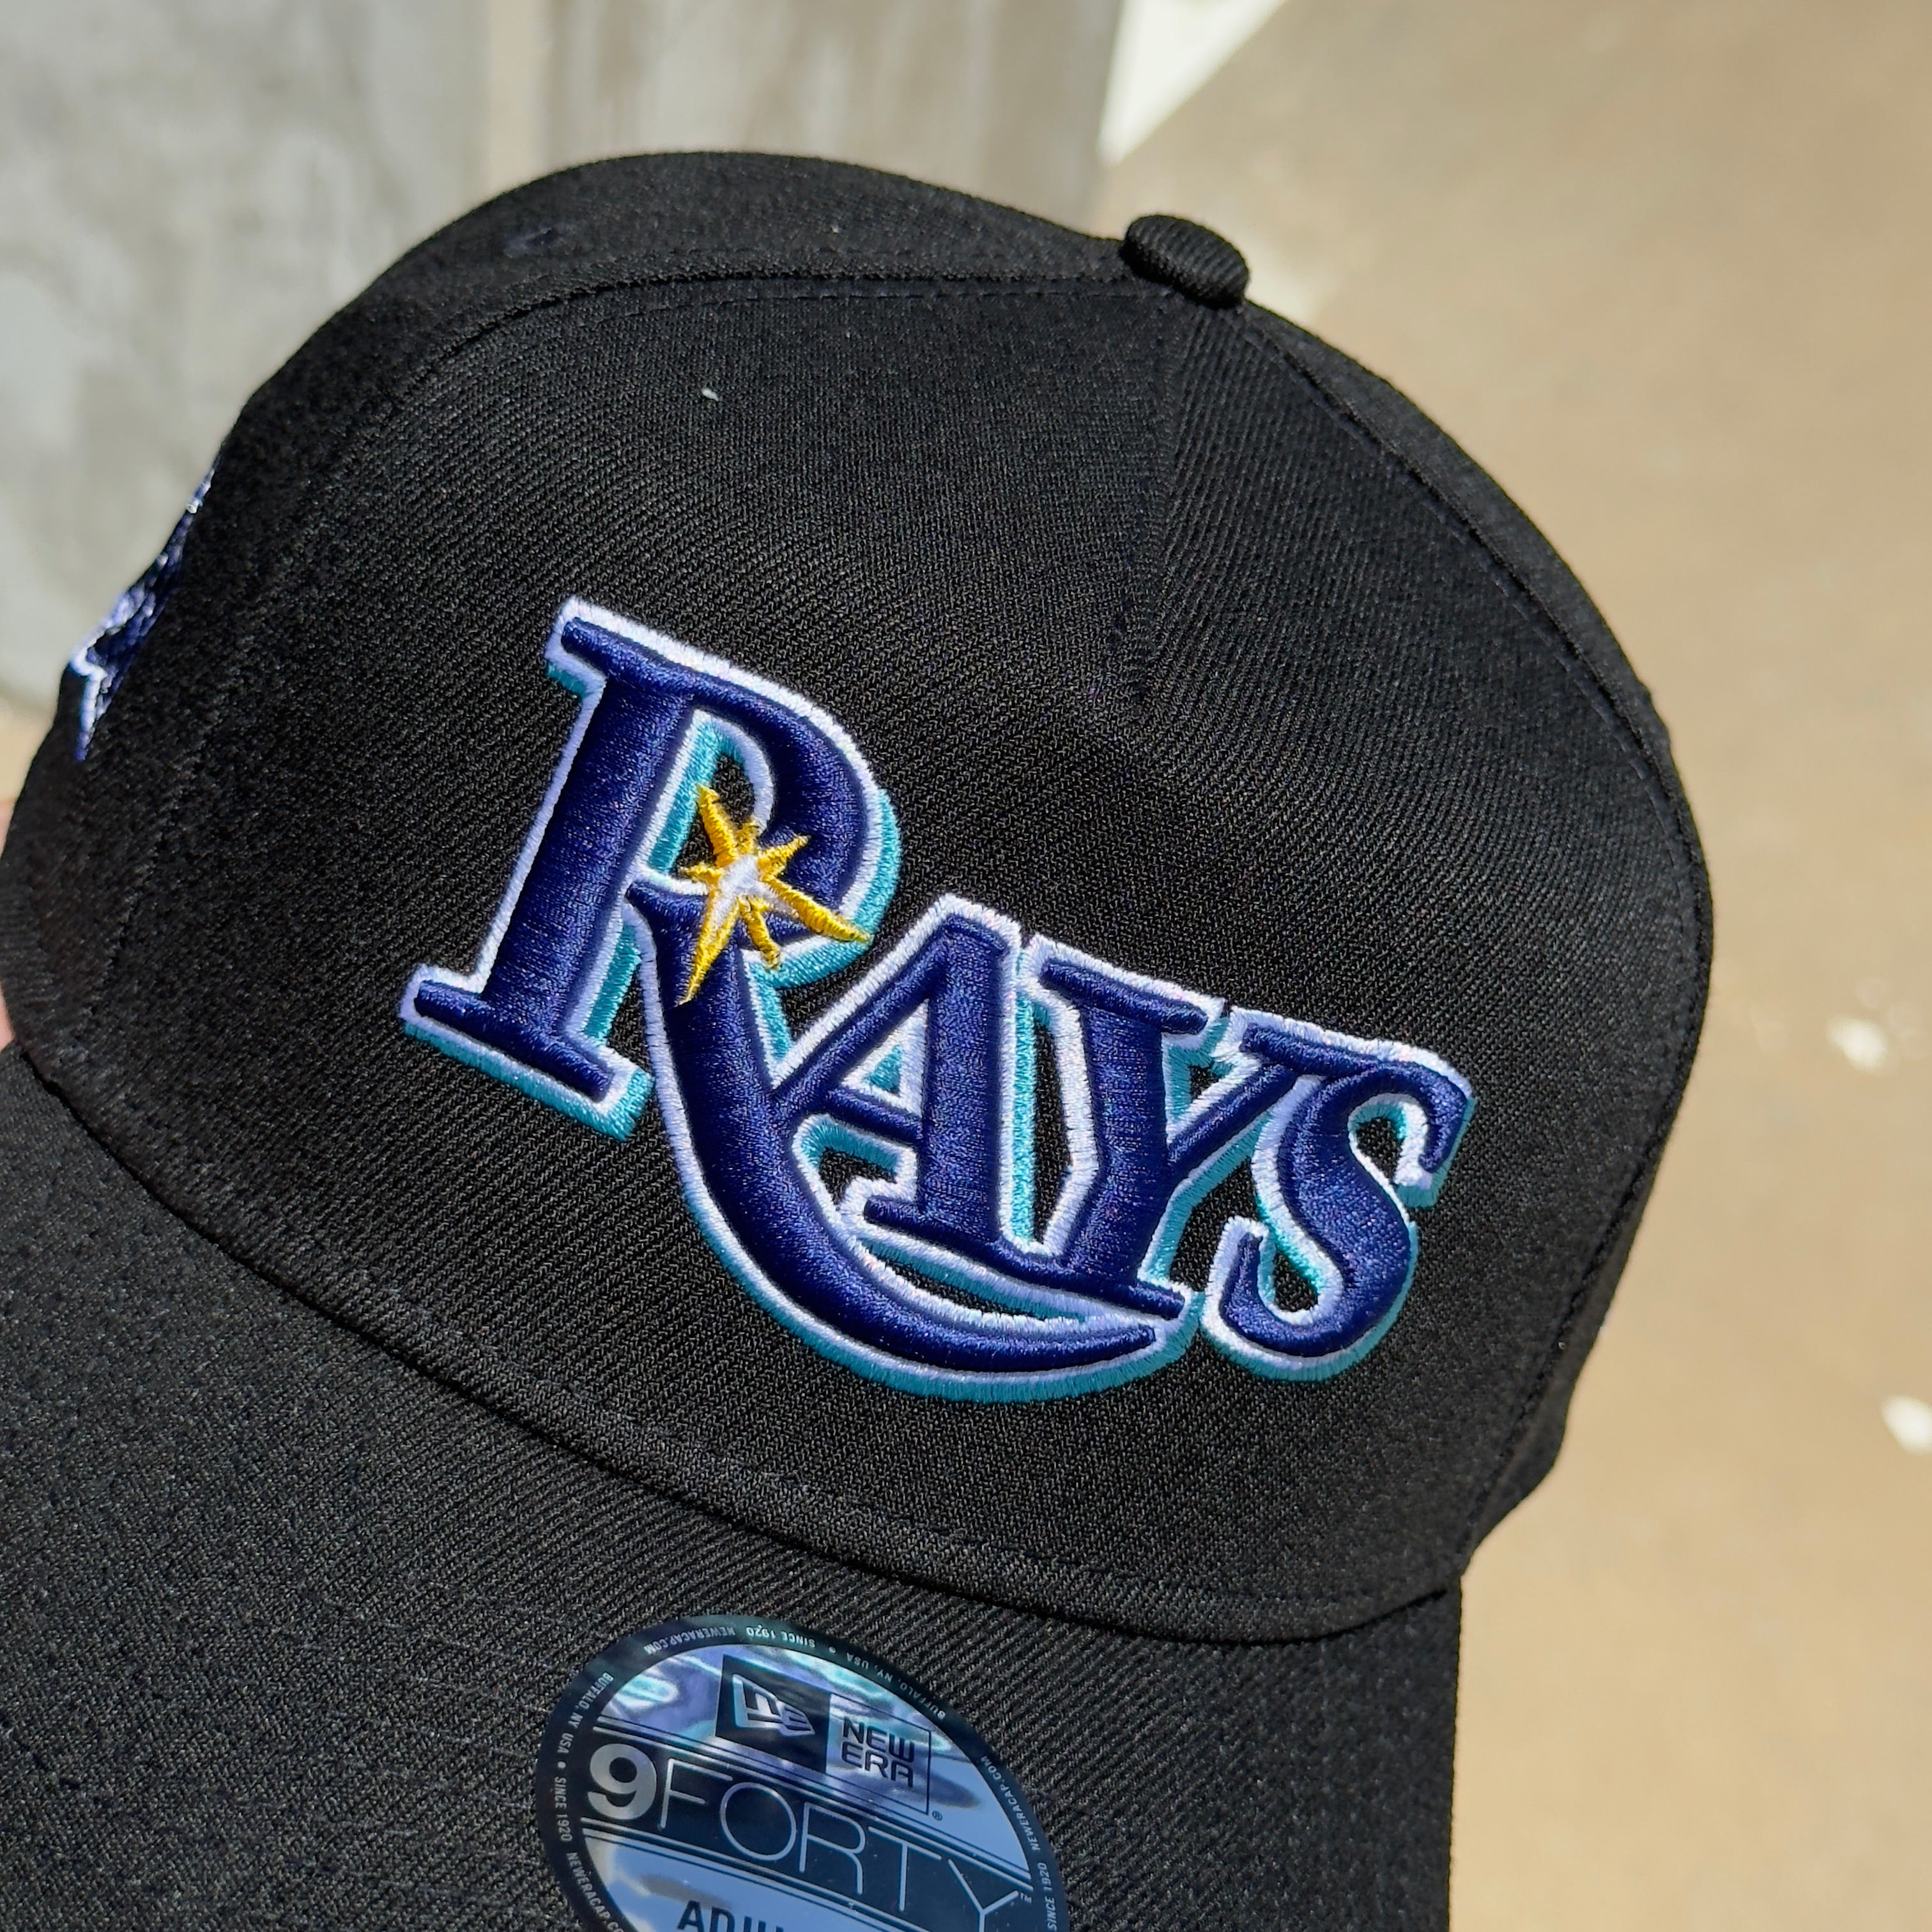 NEW Black Tampa Bay Devil Rays Logo New Era 9Forty Adjustable One Size A-Frame